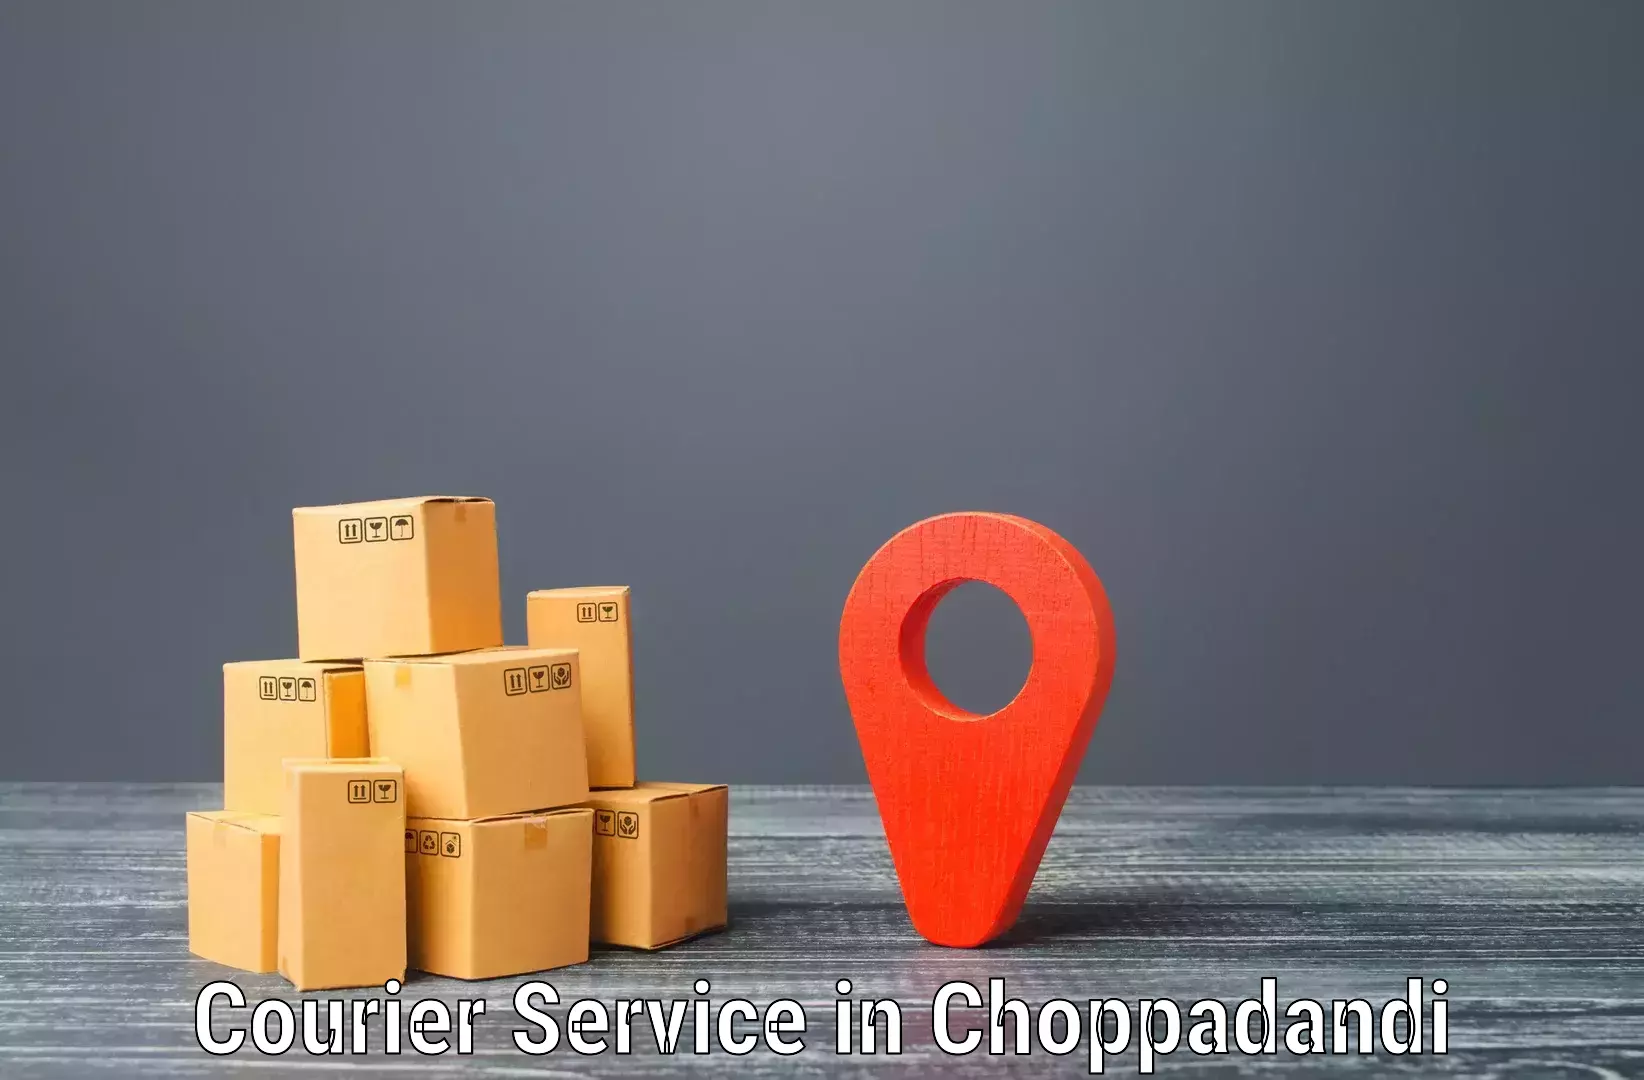 Integrated courier services in Choppadandi